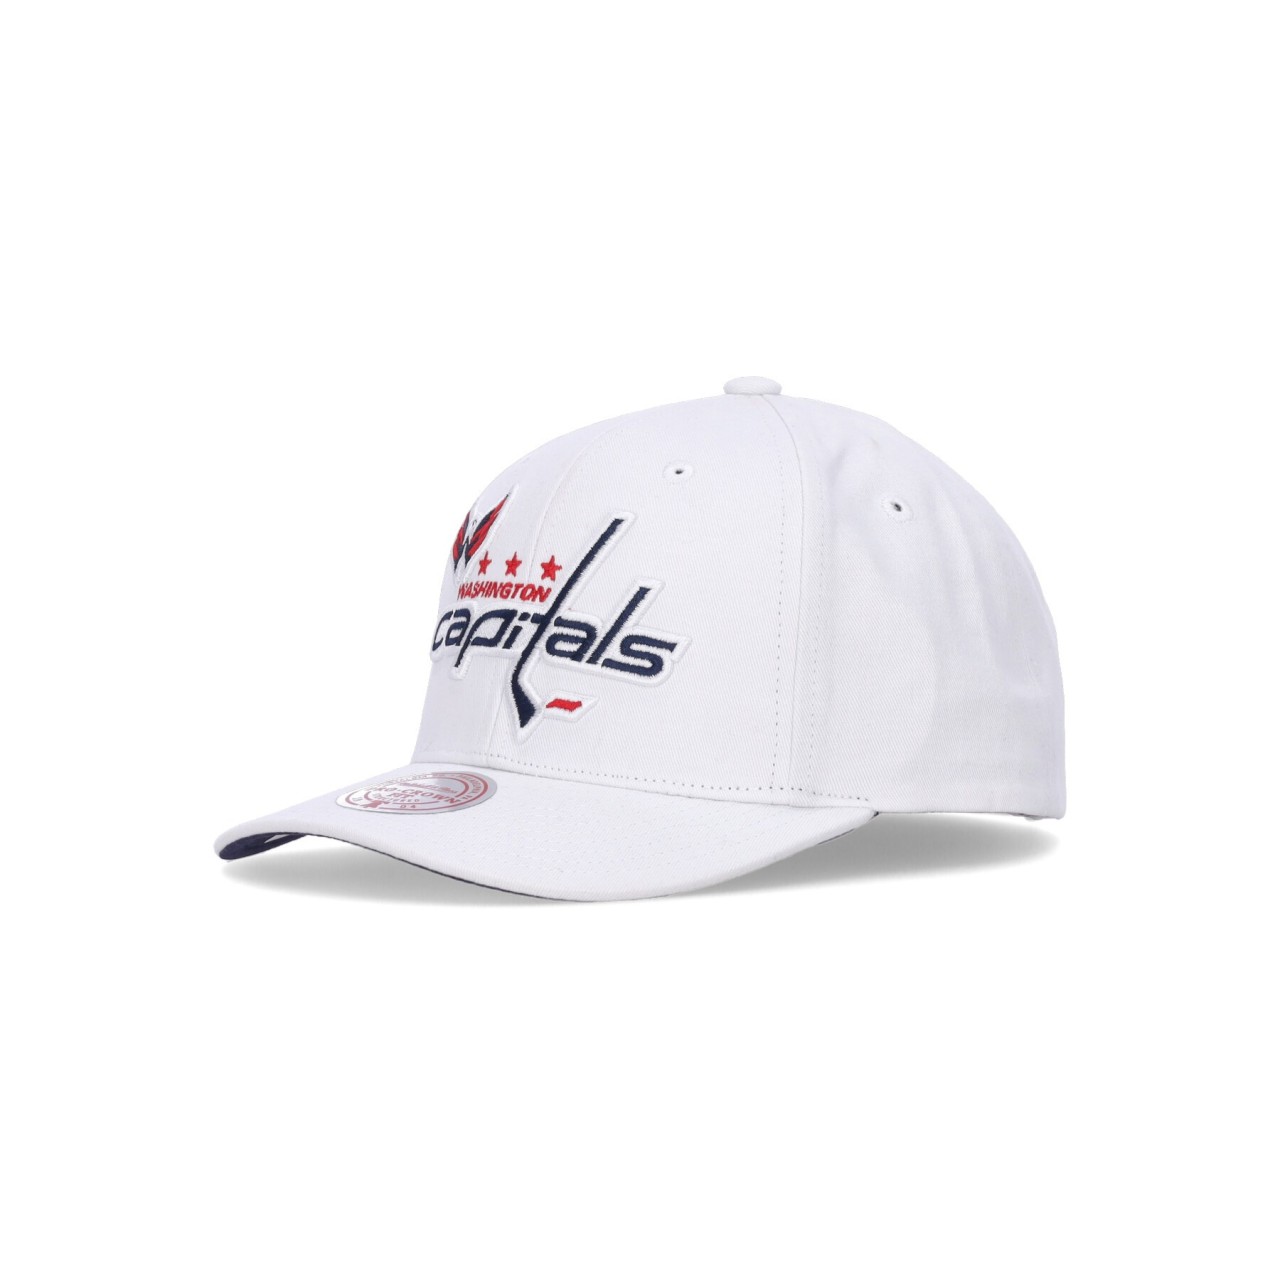 MITCHELL & NESS NHL ALL IN PRO SNAPBACK WASCAP HHSS5758-WCAYYPPPWHIT